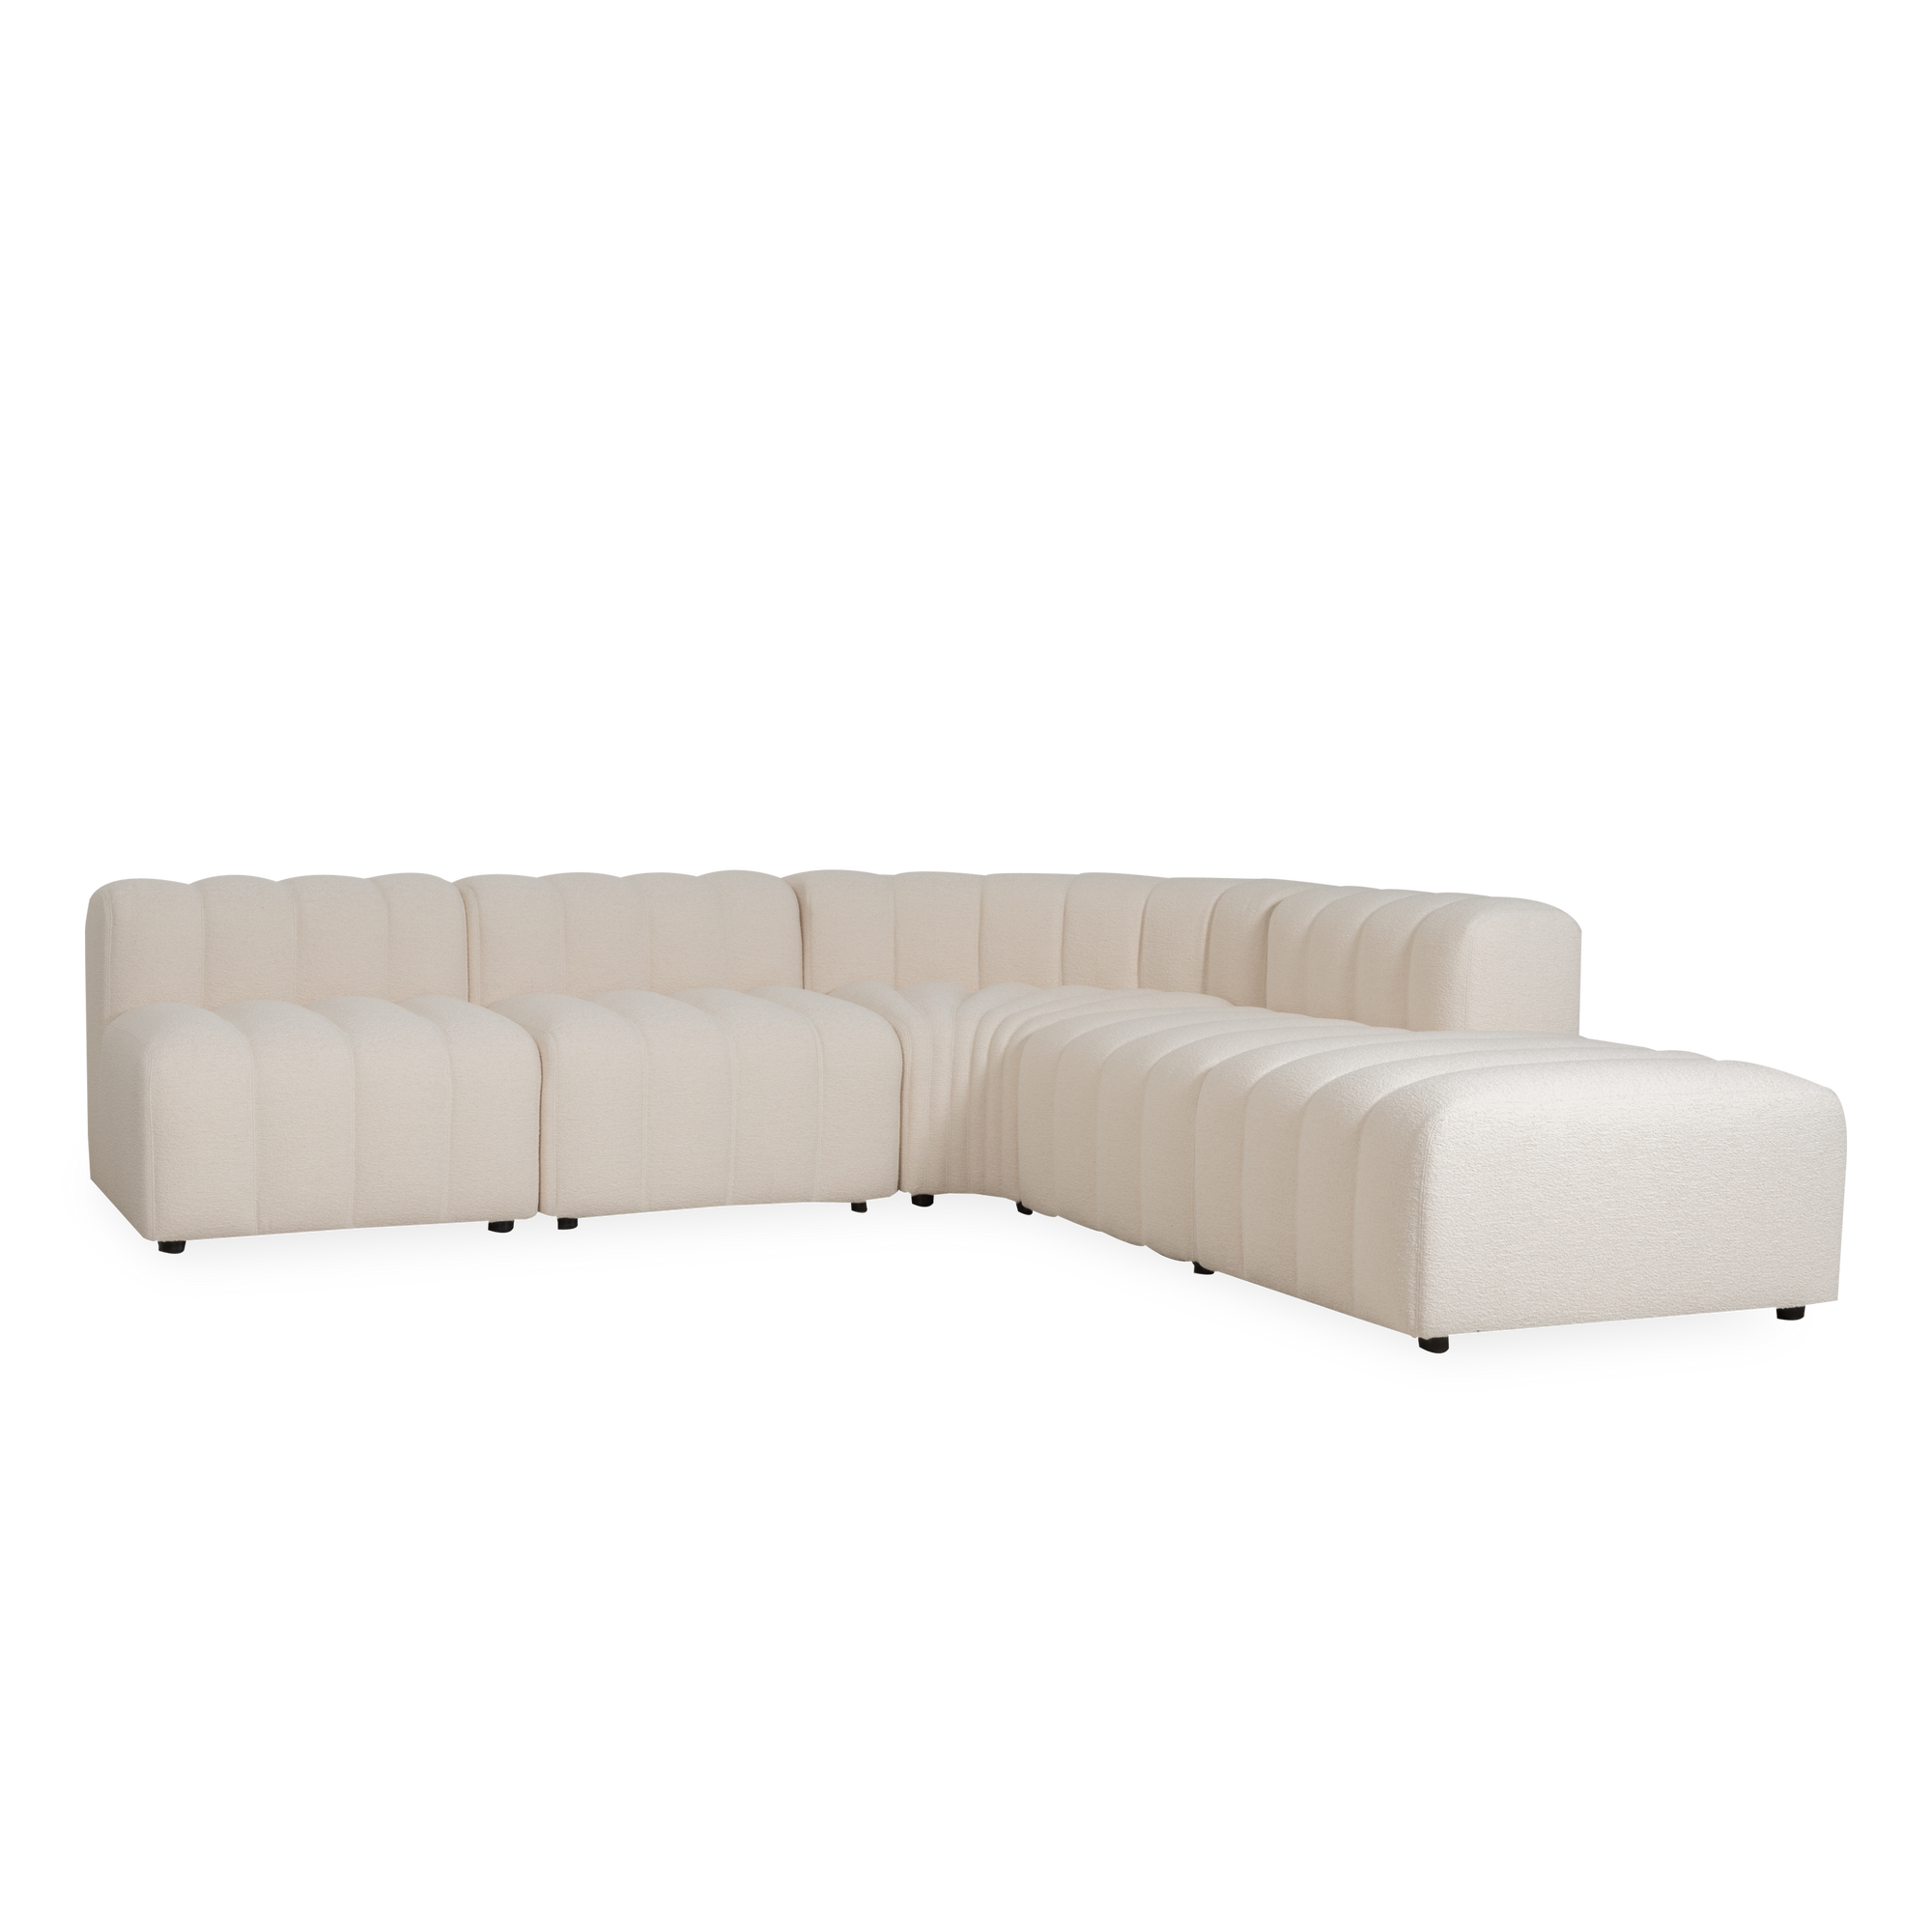 Defined by its elegant channeled tailoring, the Studio Modular Sectional takes inspiration from the design aesthetics of the 1970s.